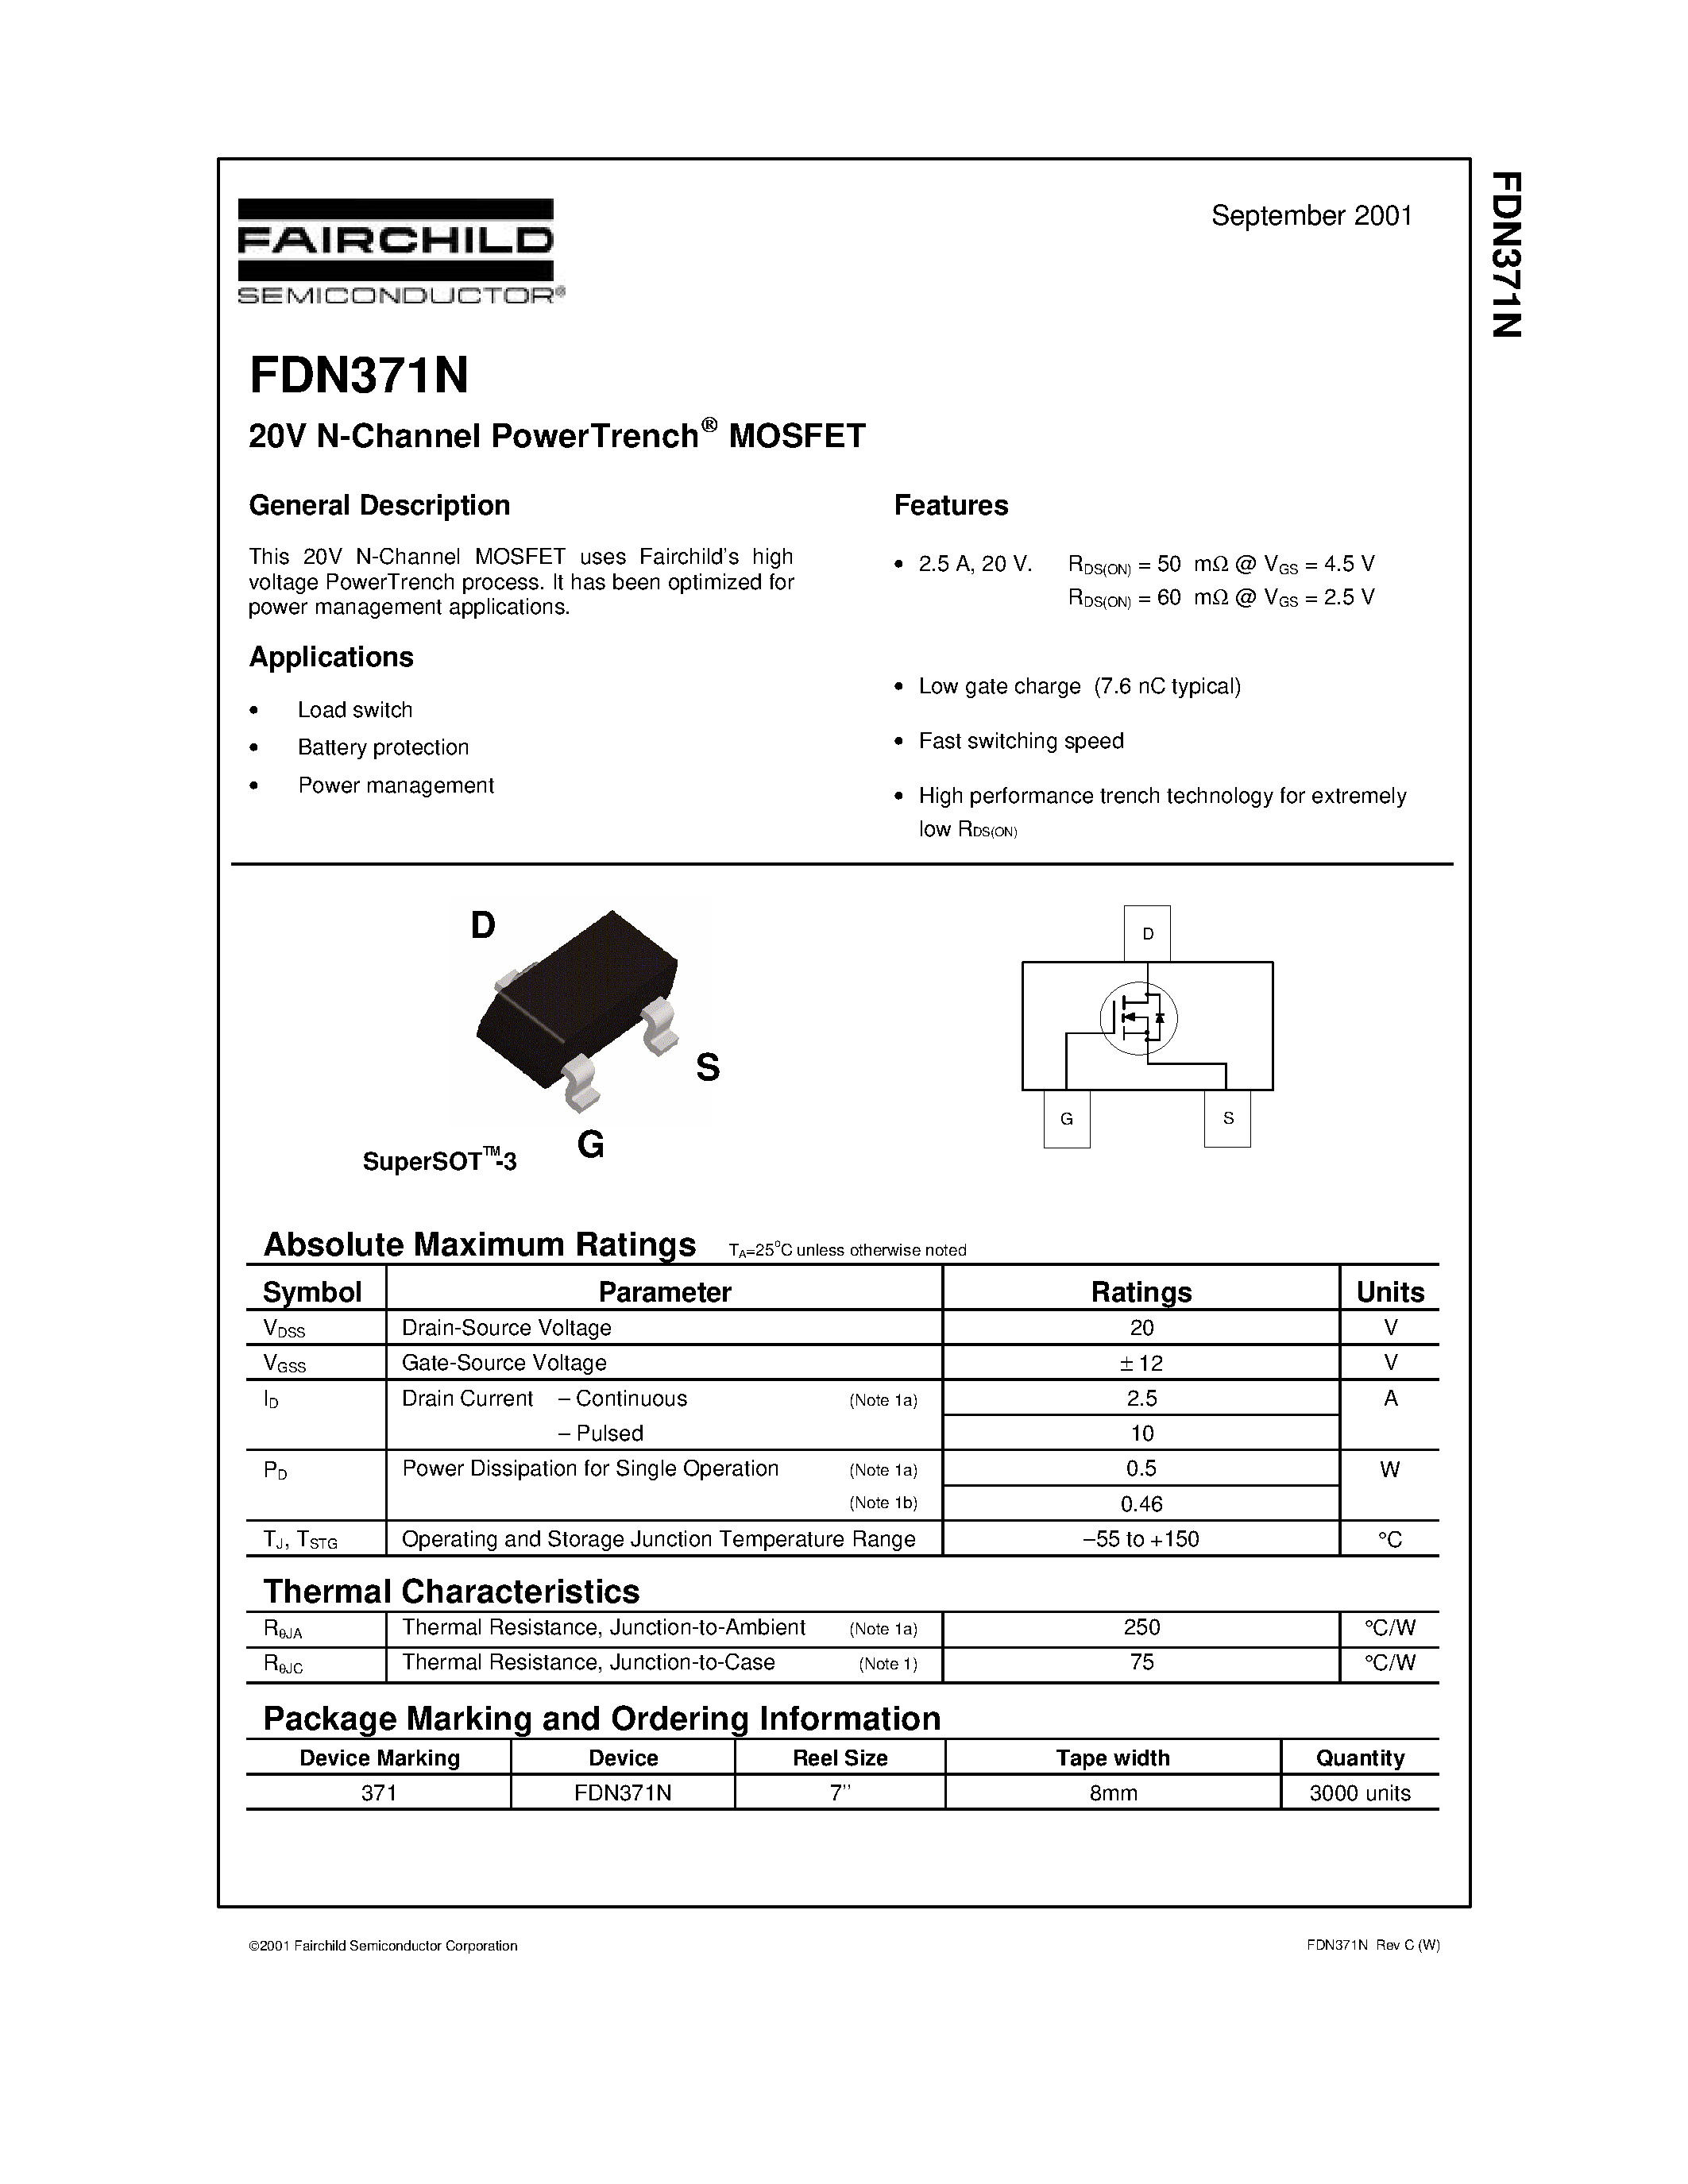 Даташит FDN371N-20V N-Channel PowerTrench MOSFET страница 1